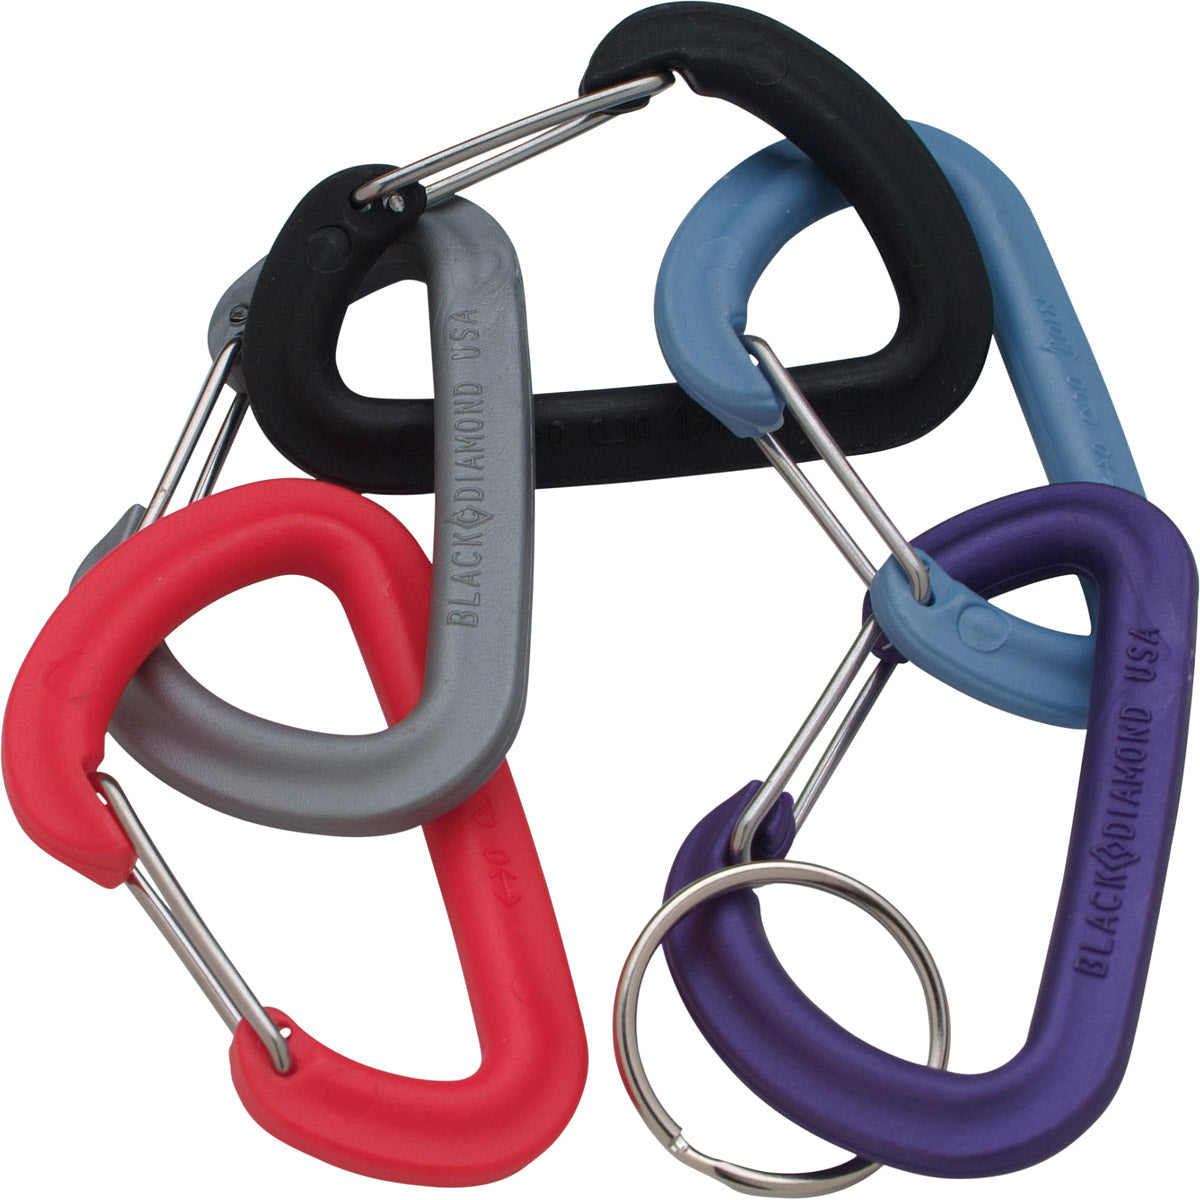 Jivewire Accessory Carabiner Large